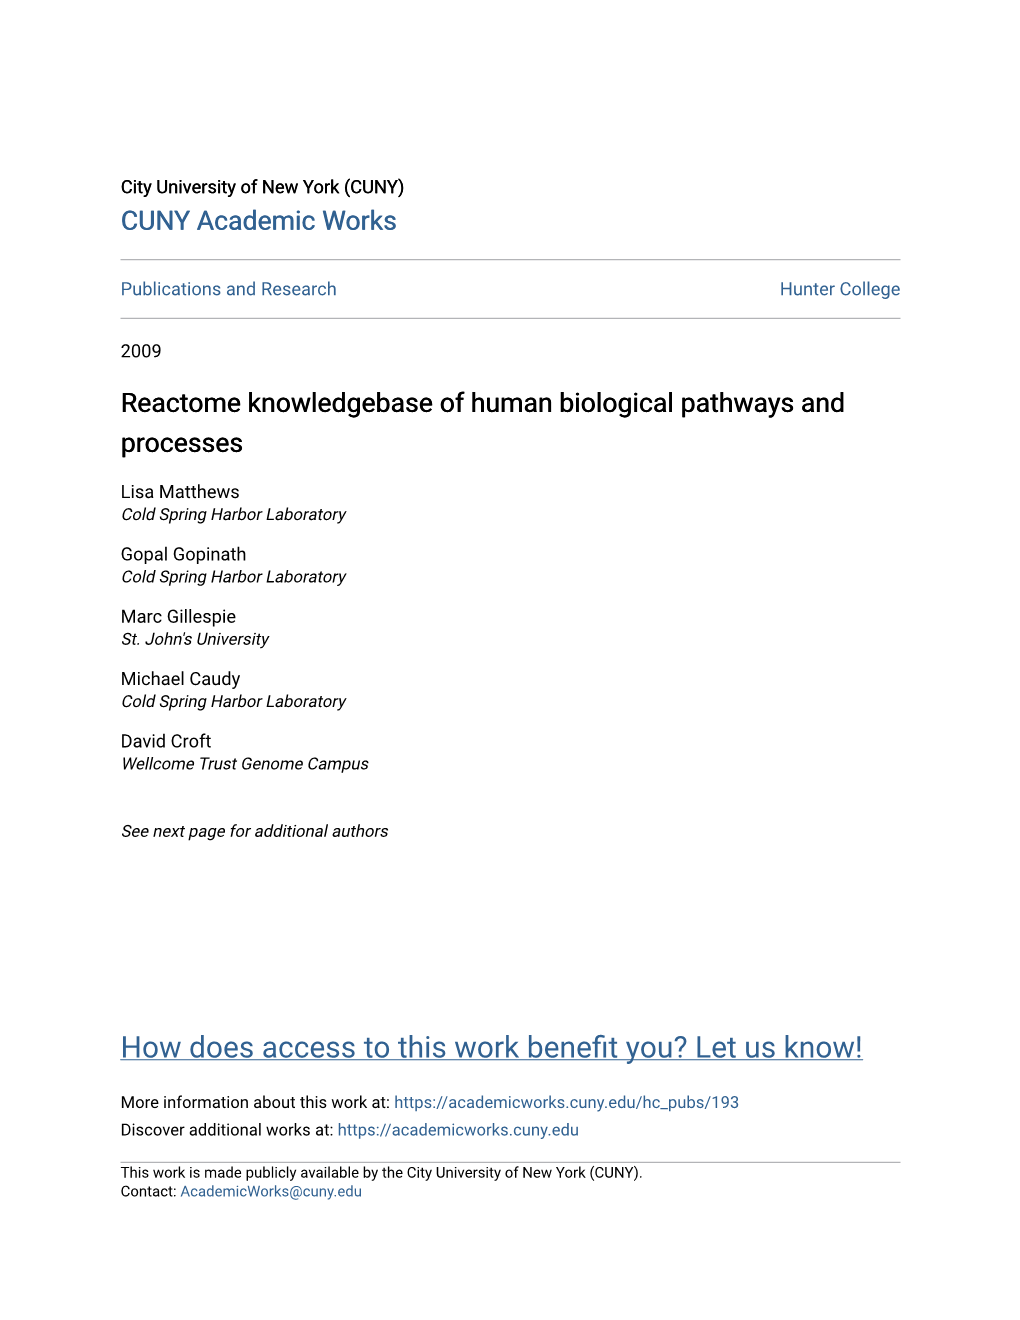 Reactome Knowledgebase of Human Biological Pathways and Processes